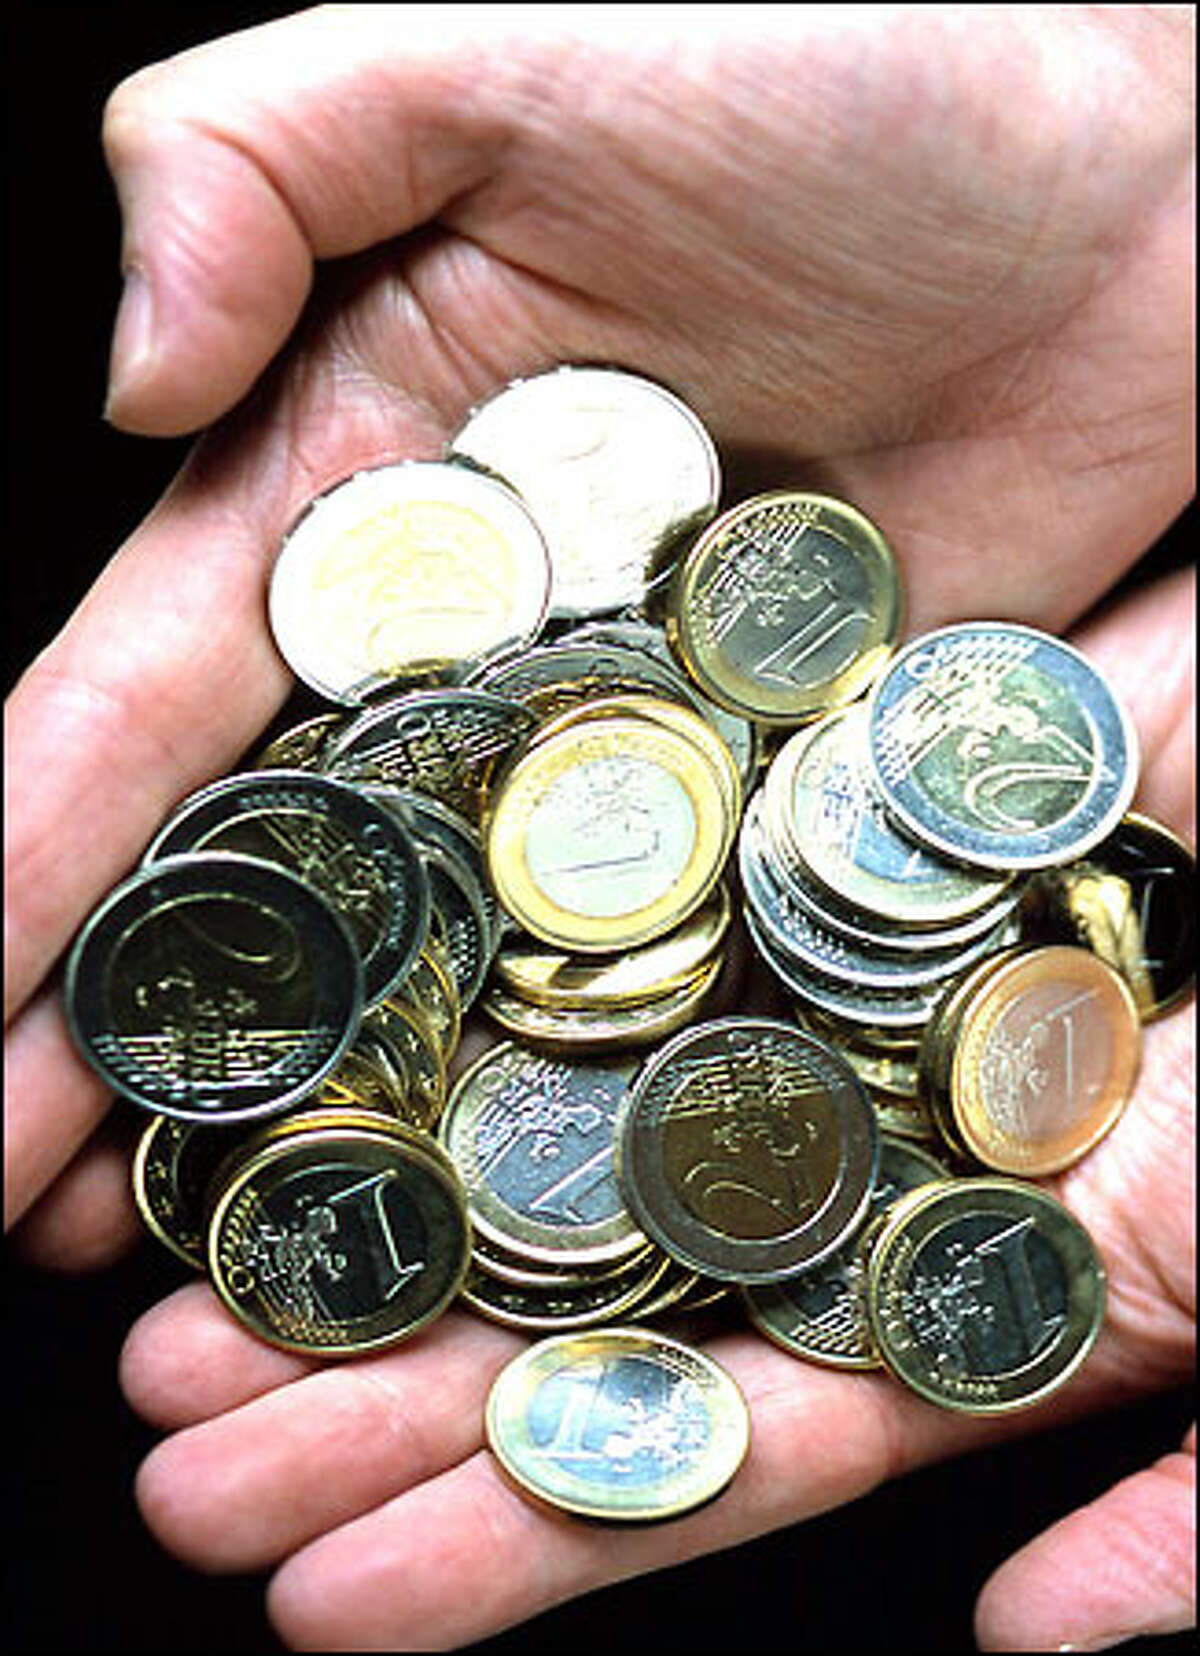 One-euro and 2-euro coins like these are the new money of millions.